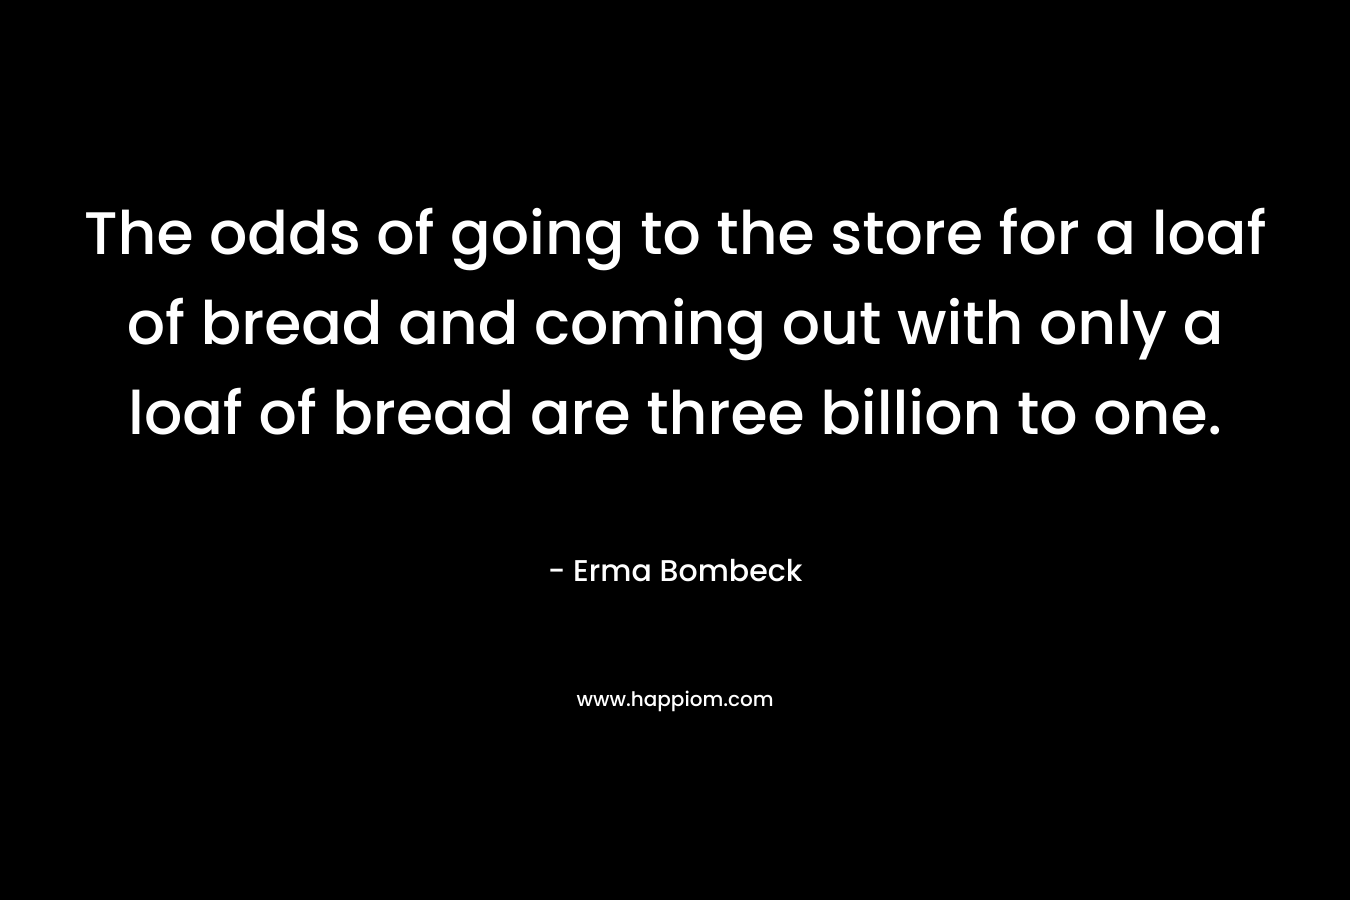 The odds of going to the store for a loaf of bread and coming out with only a loaf of bread are three billion to one.